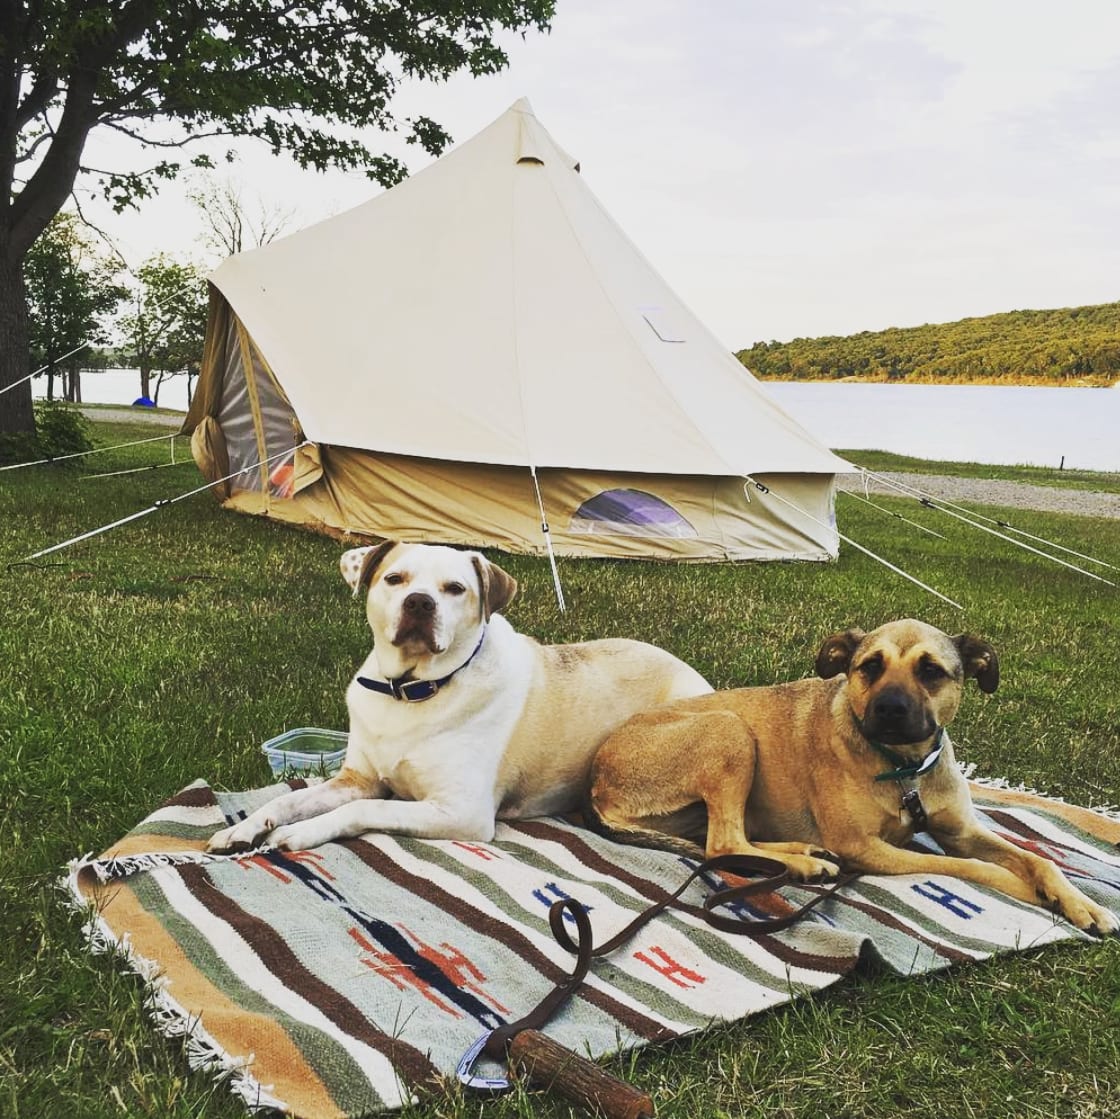 Camping with dogs!